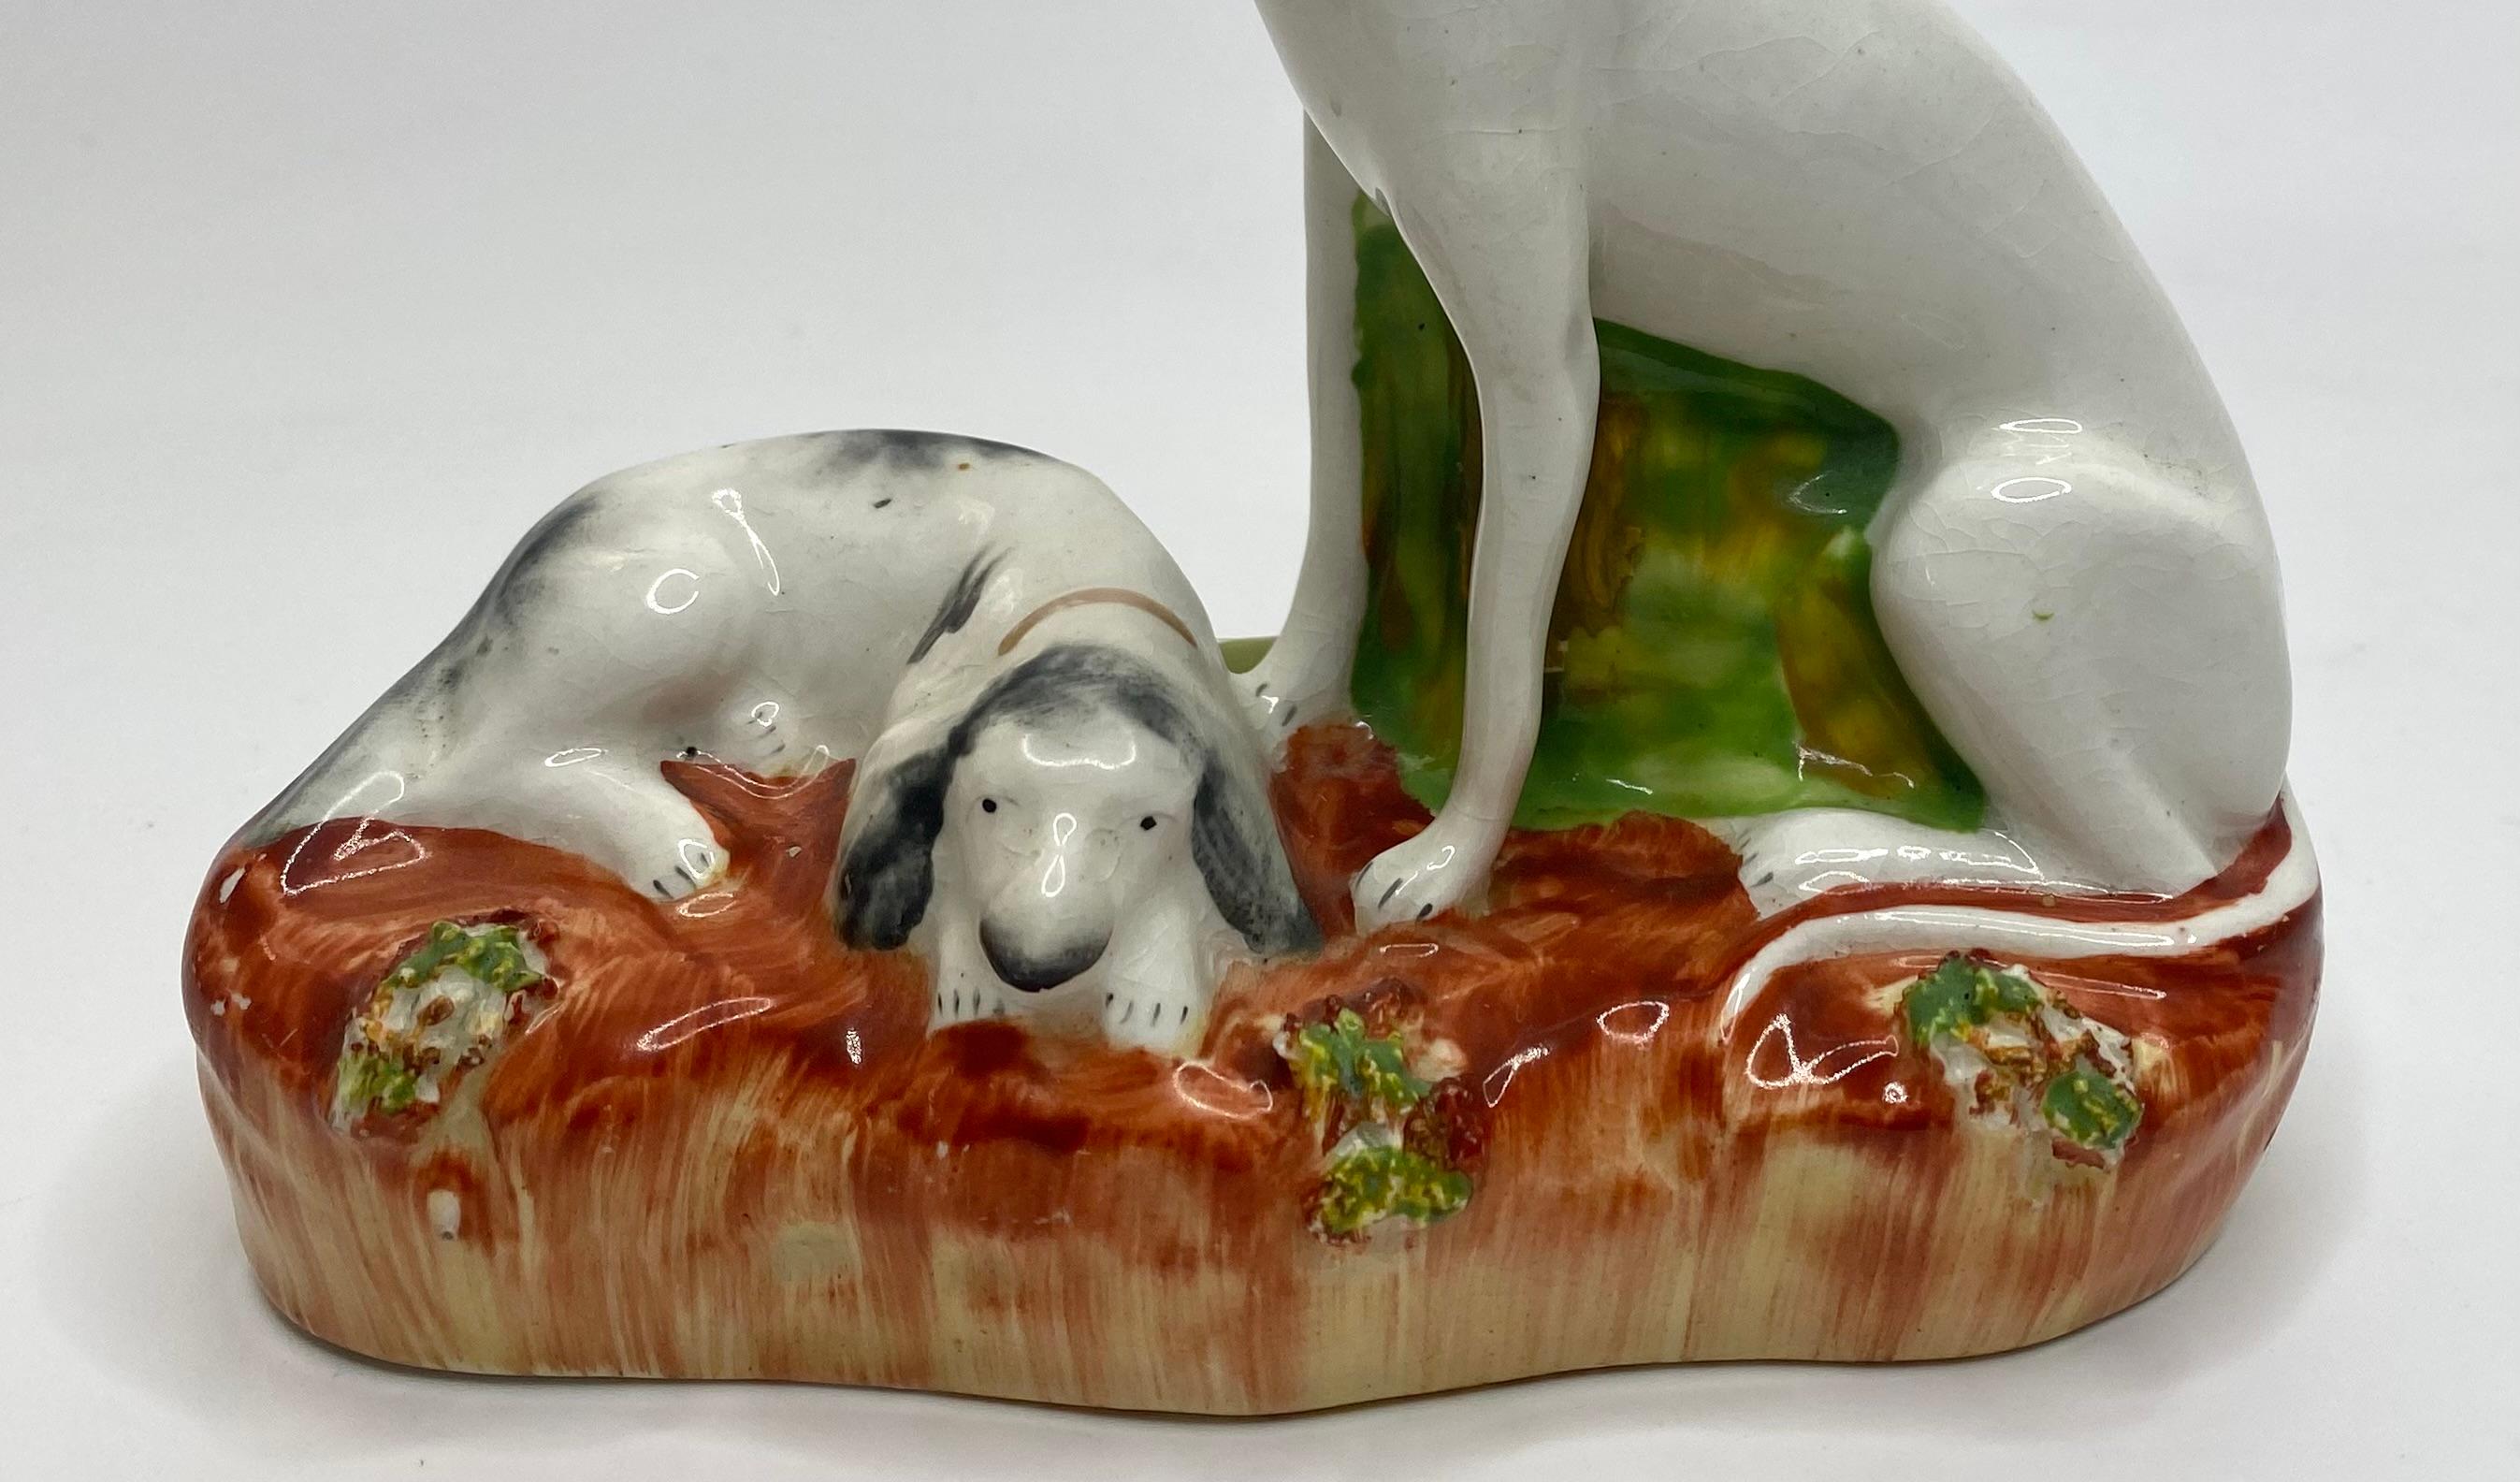 Fired Staffordshire pottery Greyhound & Harrier group, c. 1850. Thomas Parr.